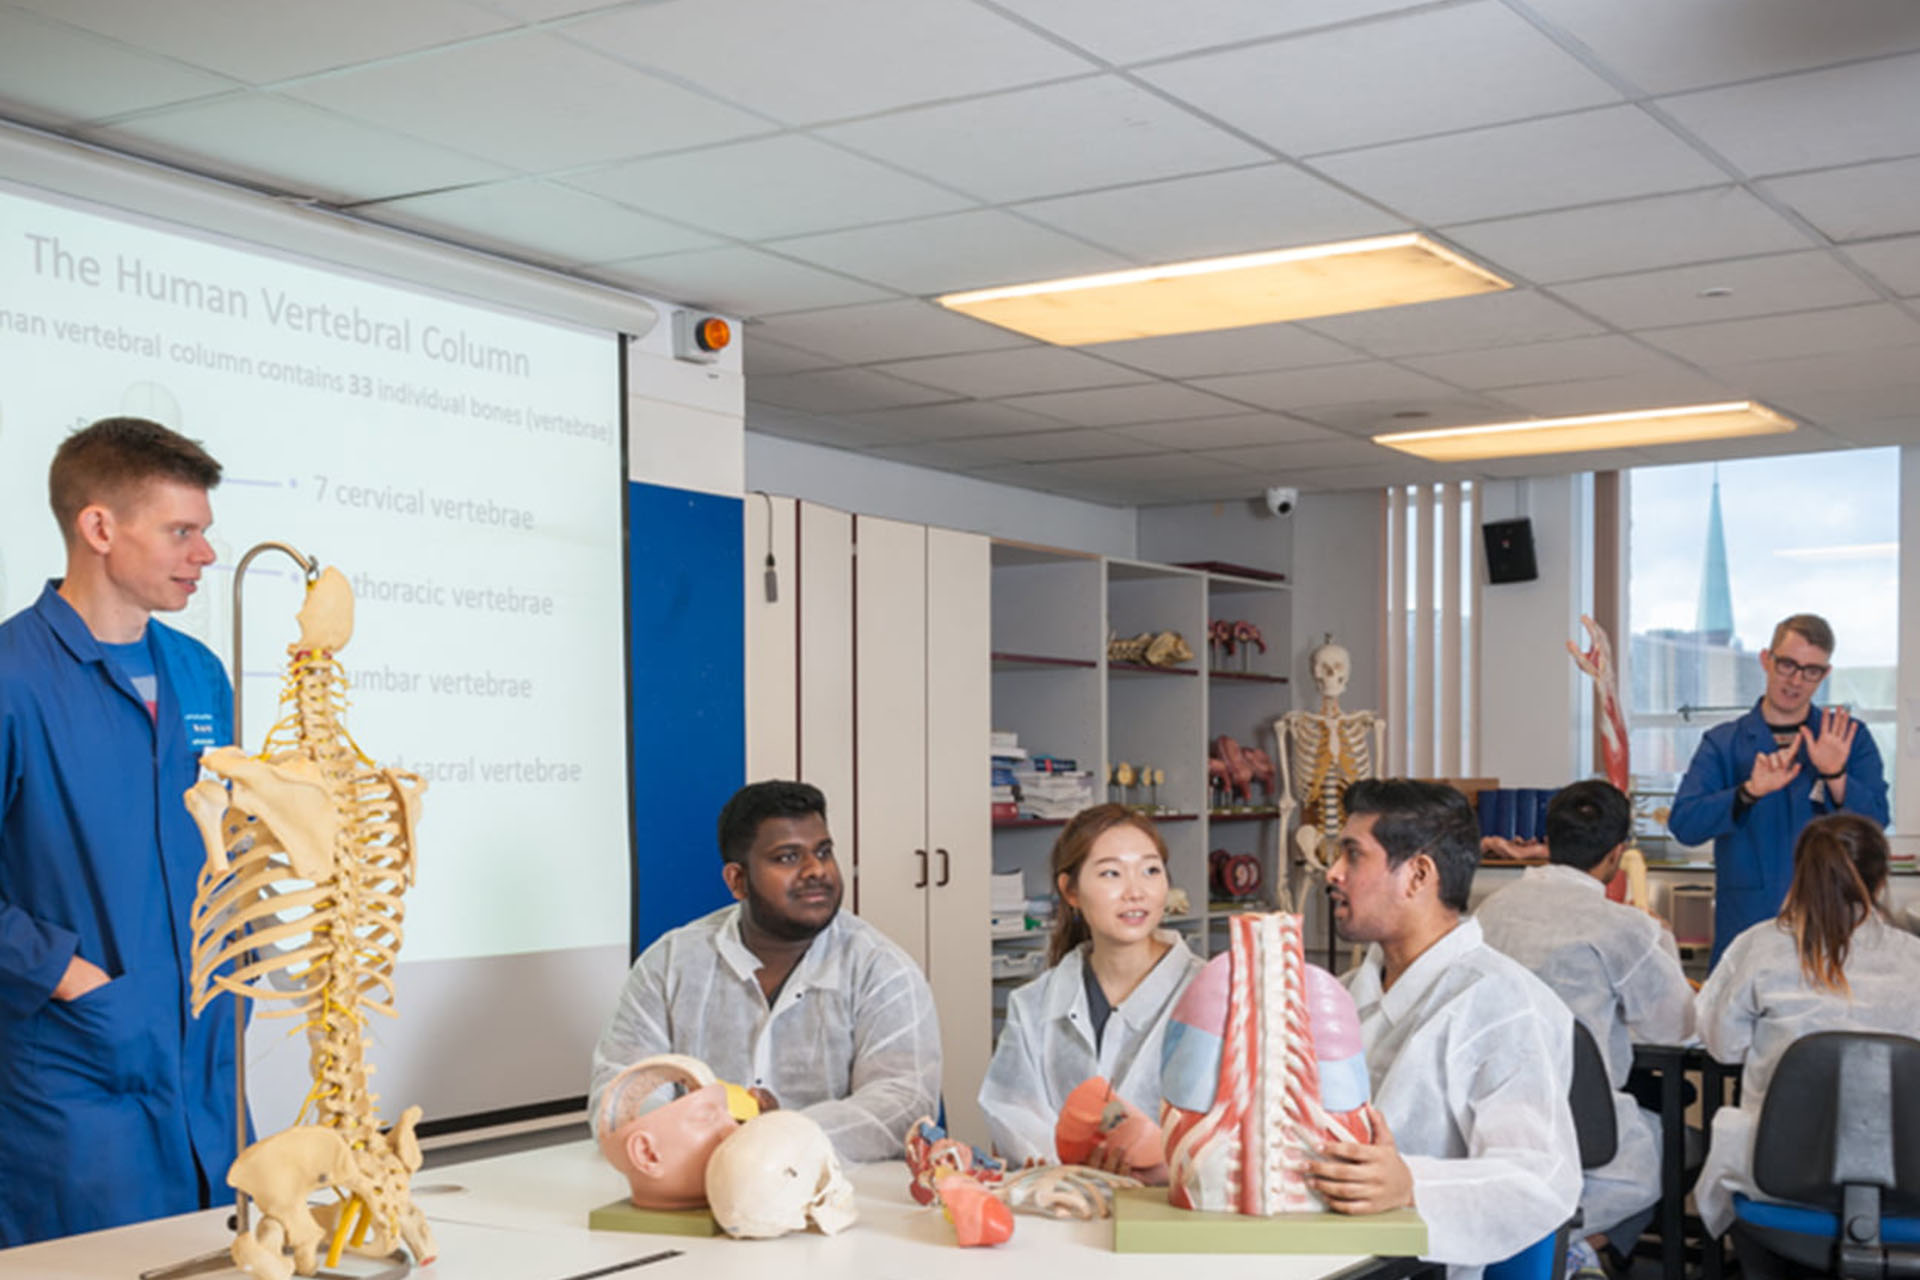 Technicians teaching students with anatomy models